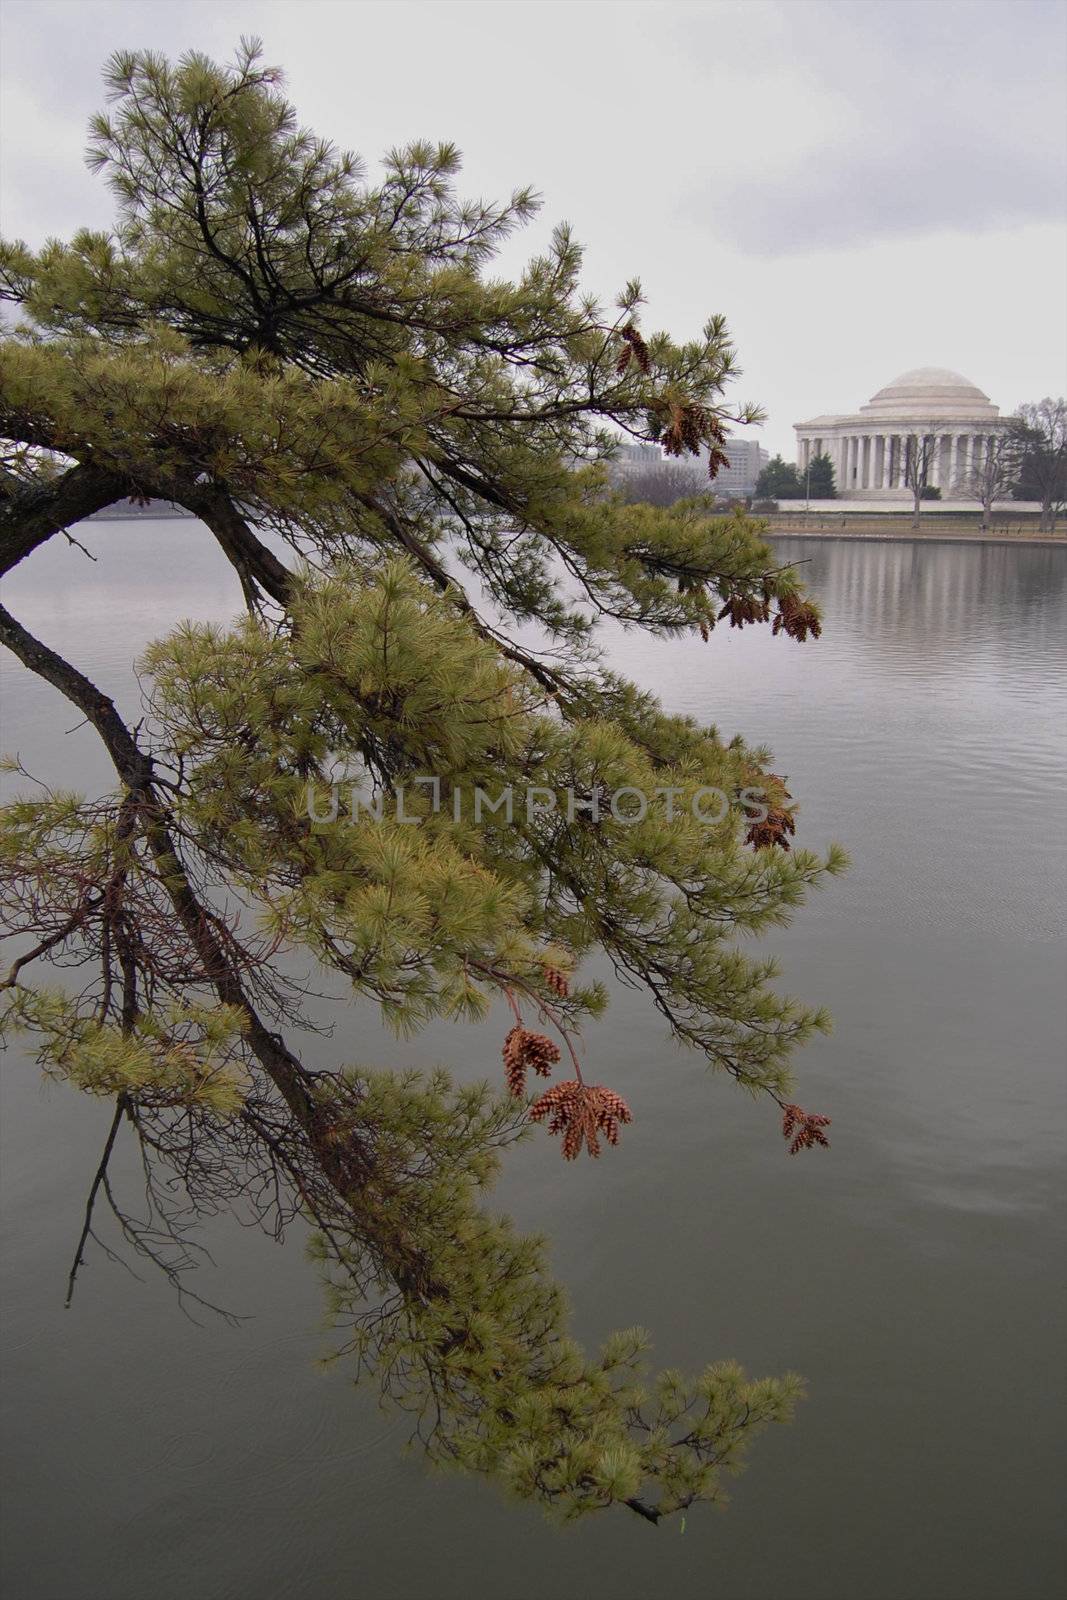 The Jefferson Memorial seen from across the Tidal Basin in Washington DC.